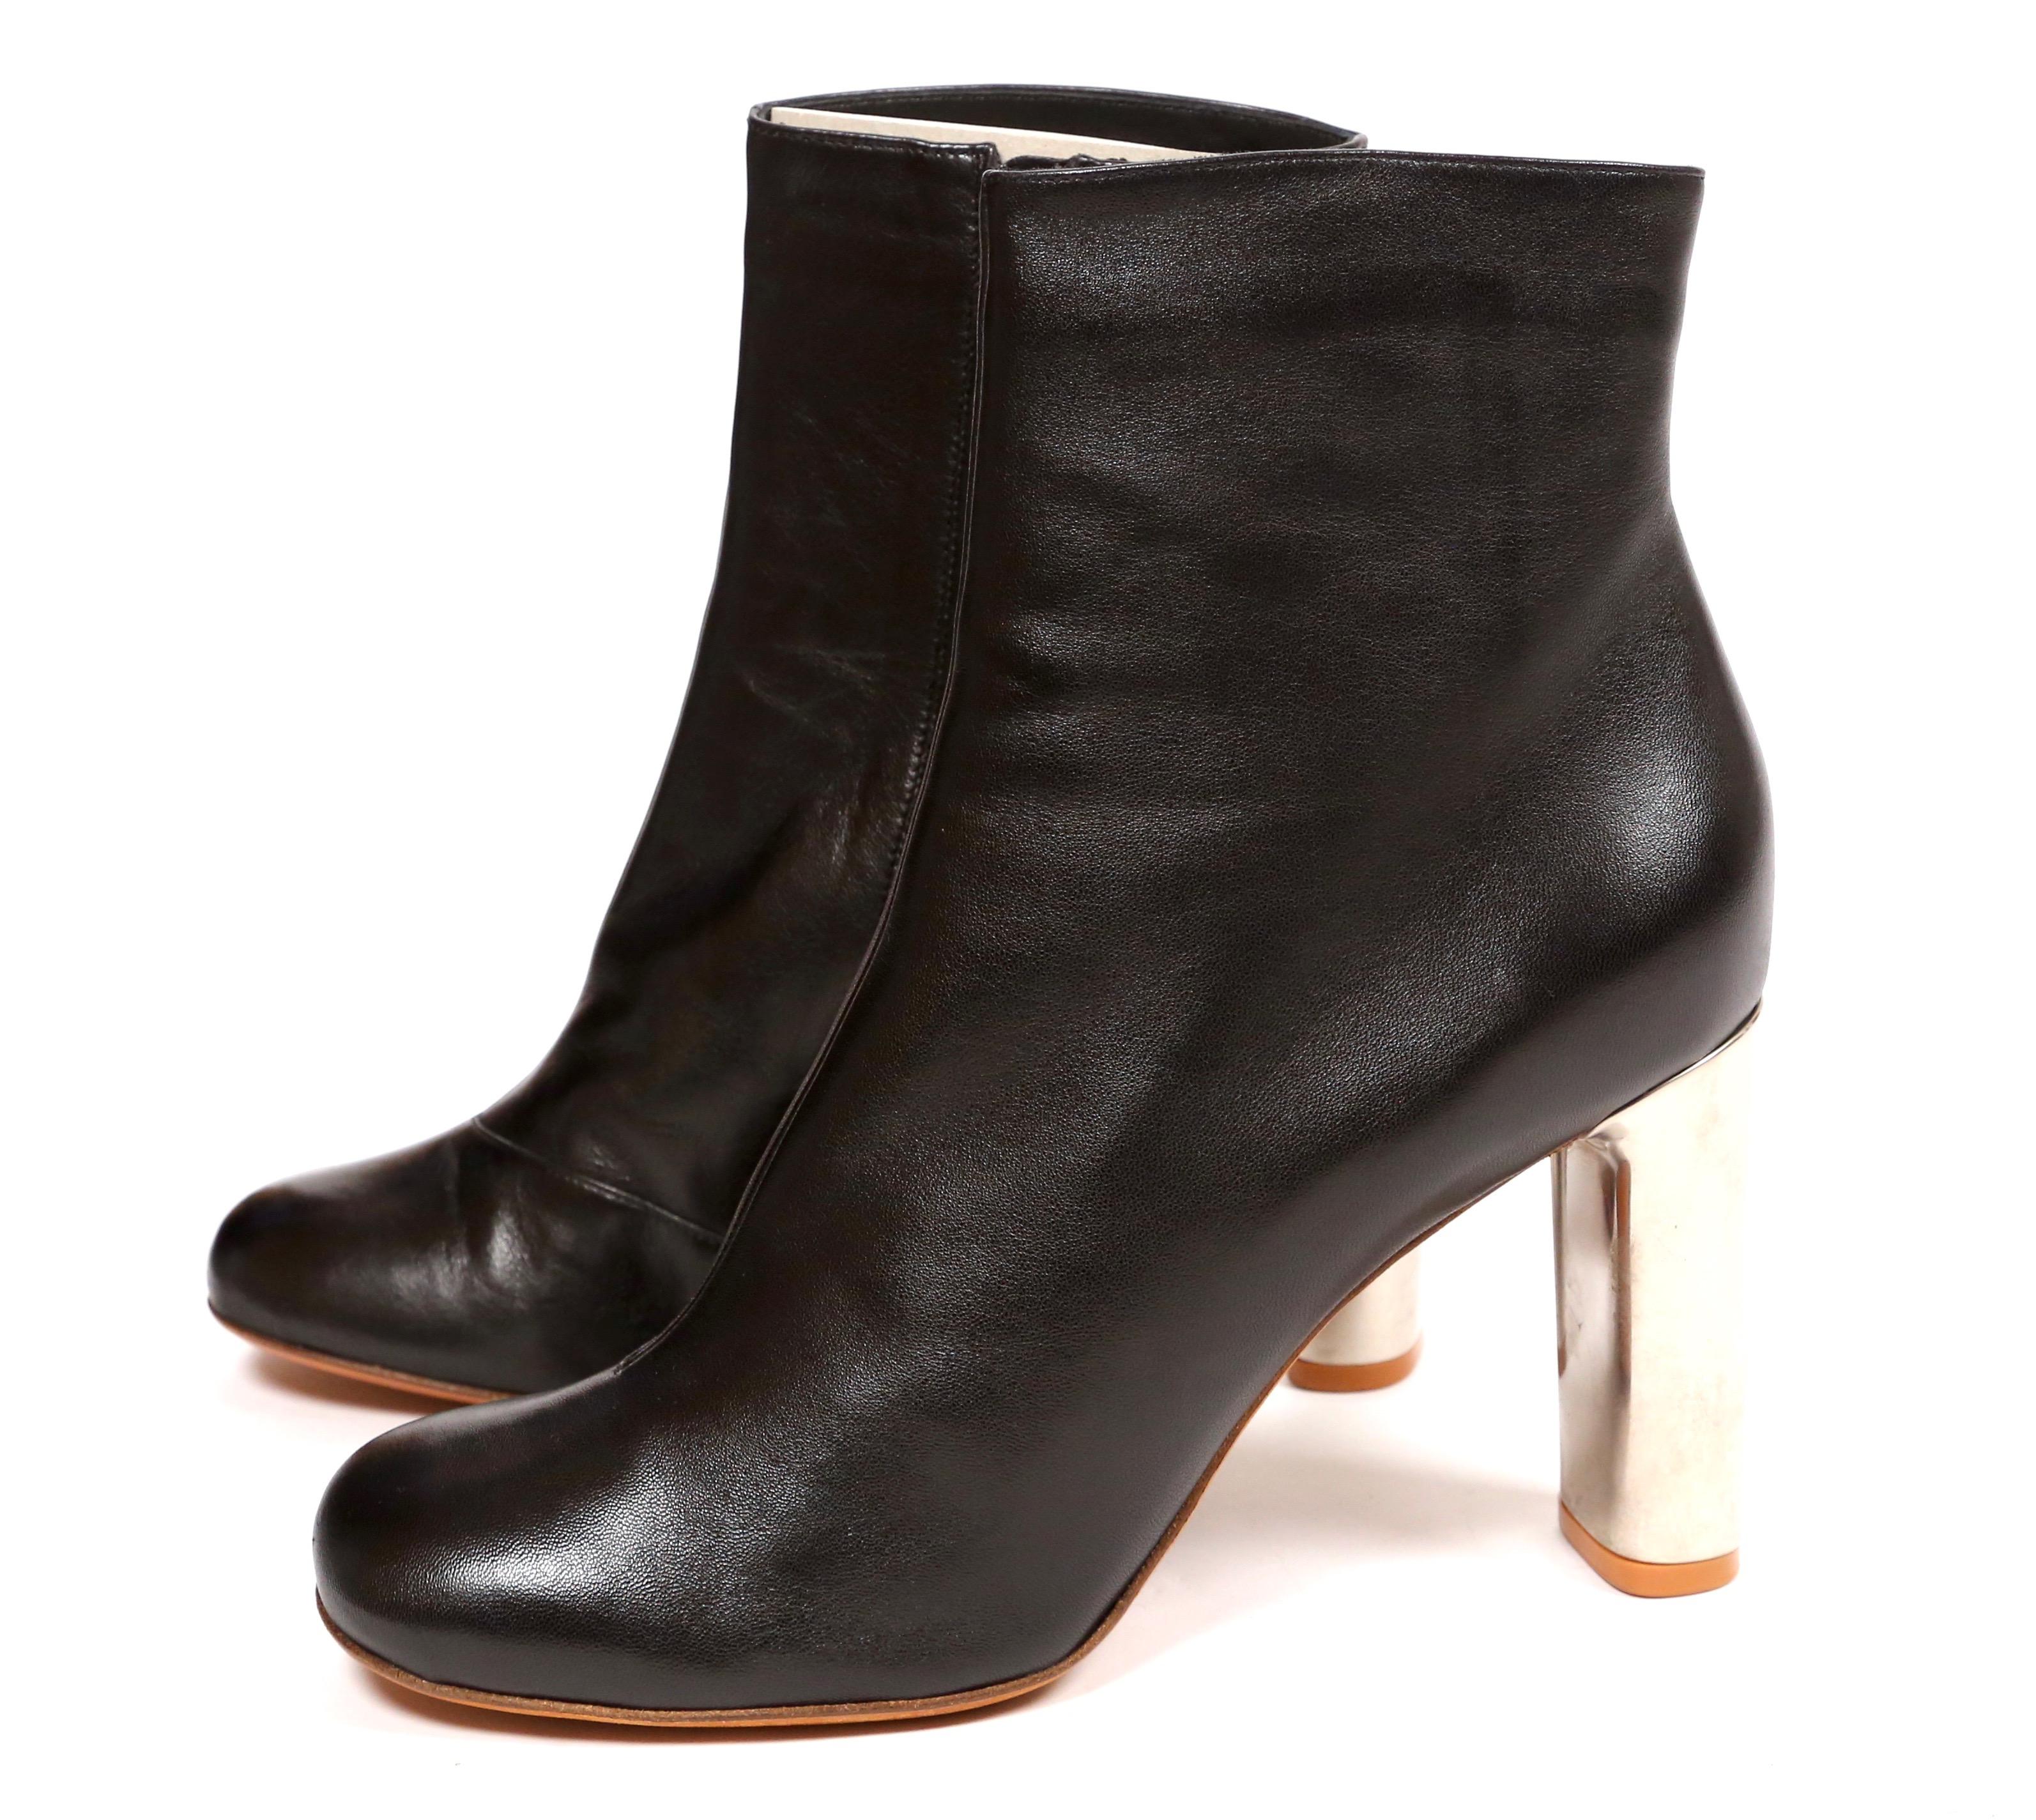 Jet-black, lambskin leather, ankle boots with silver heels designed by Phoebe Philo for Celine. French size 41. Approximate measurements of insoles: length 10.5